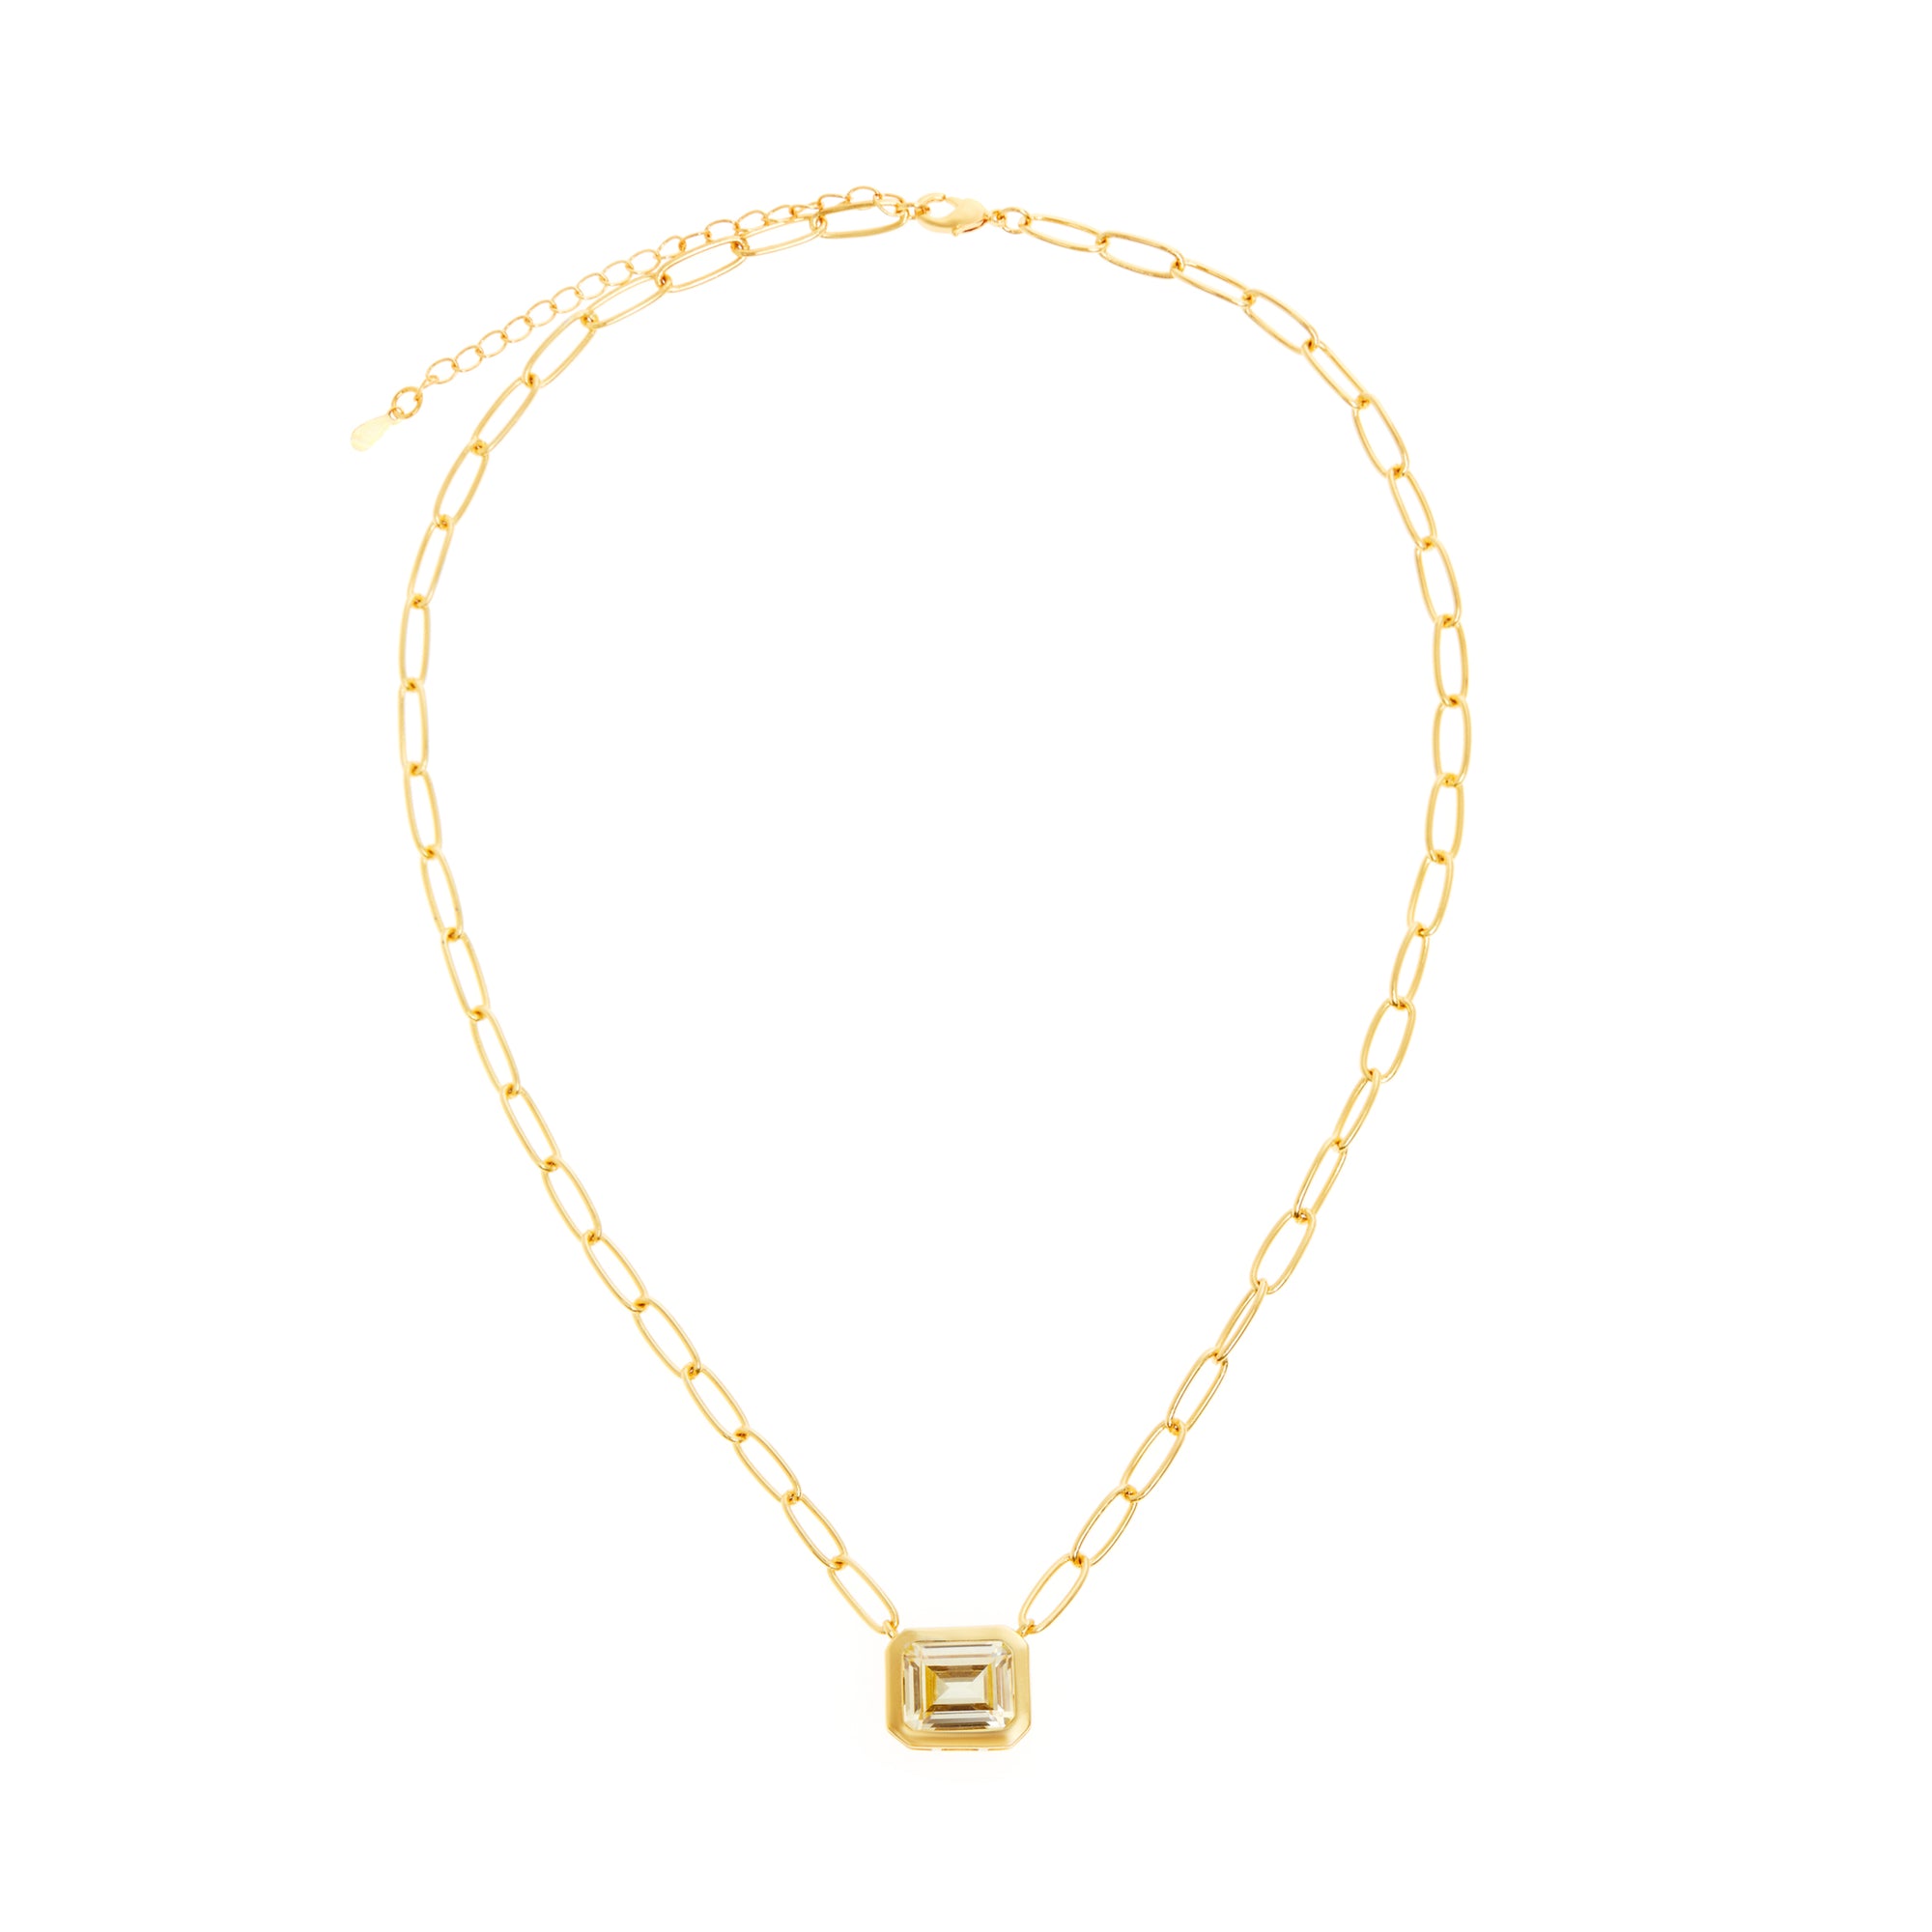 Necklace 'Piped Edge Square' – Crystal